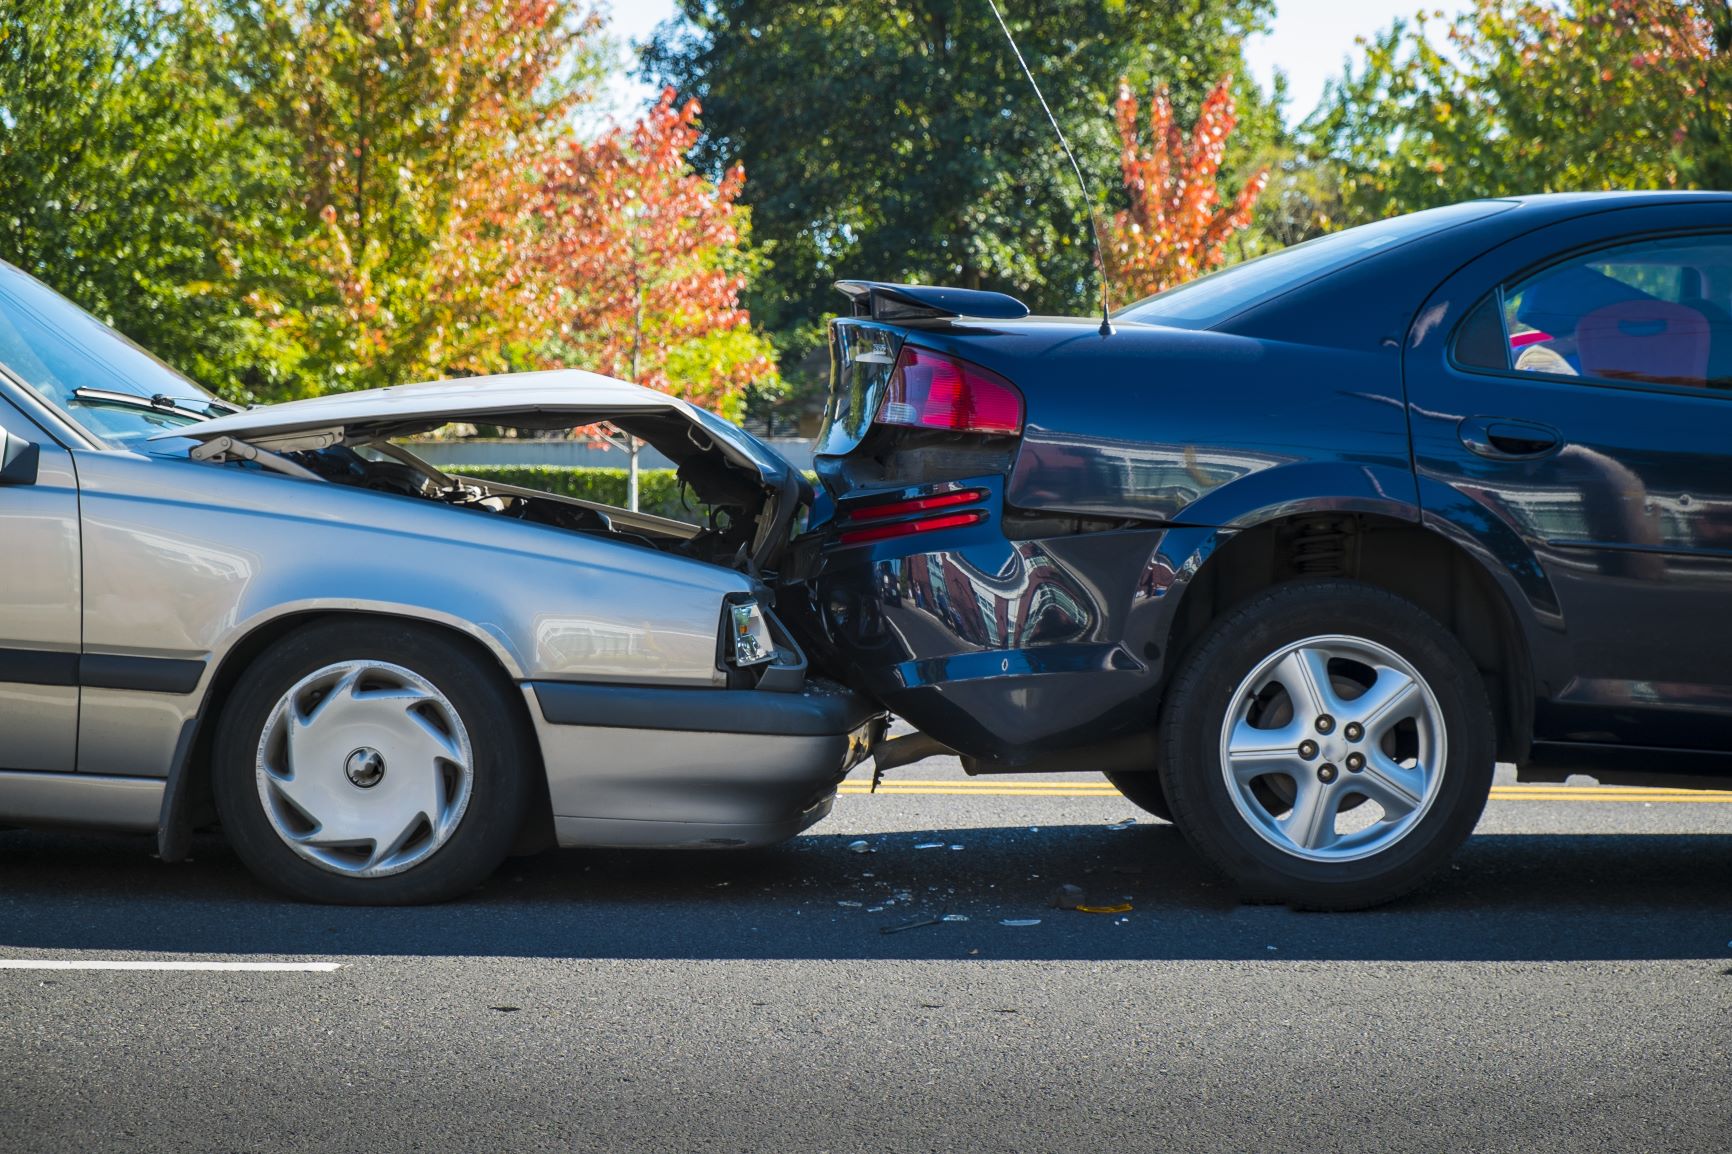 What You Should Know About Rear-End Collisions In North Carolina